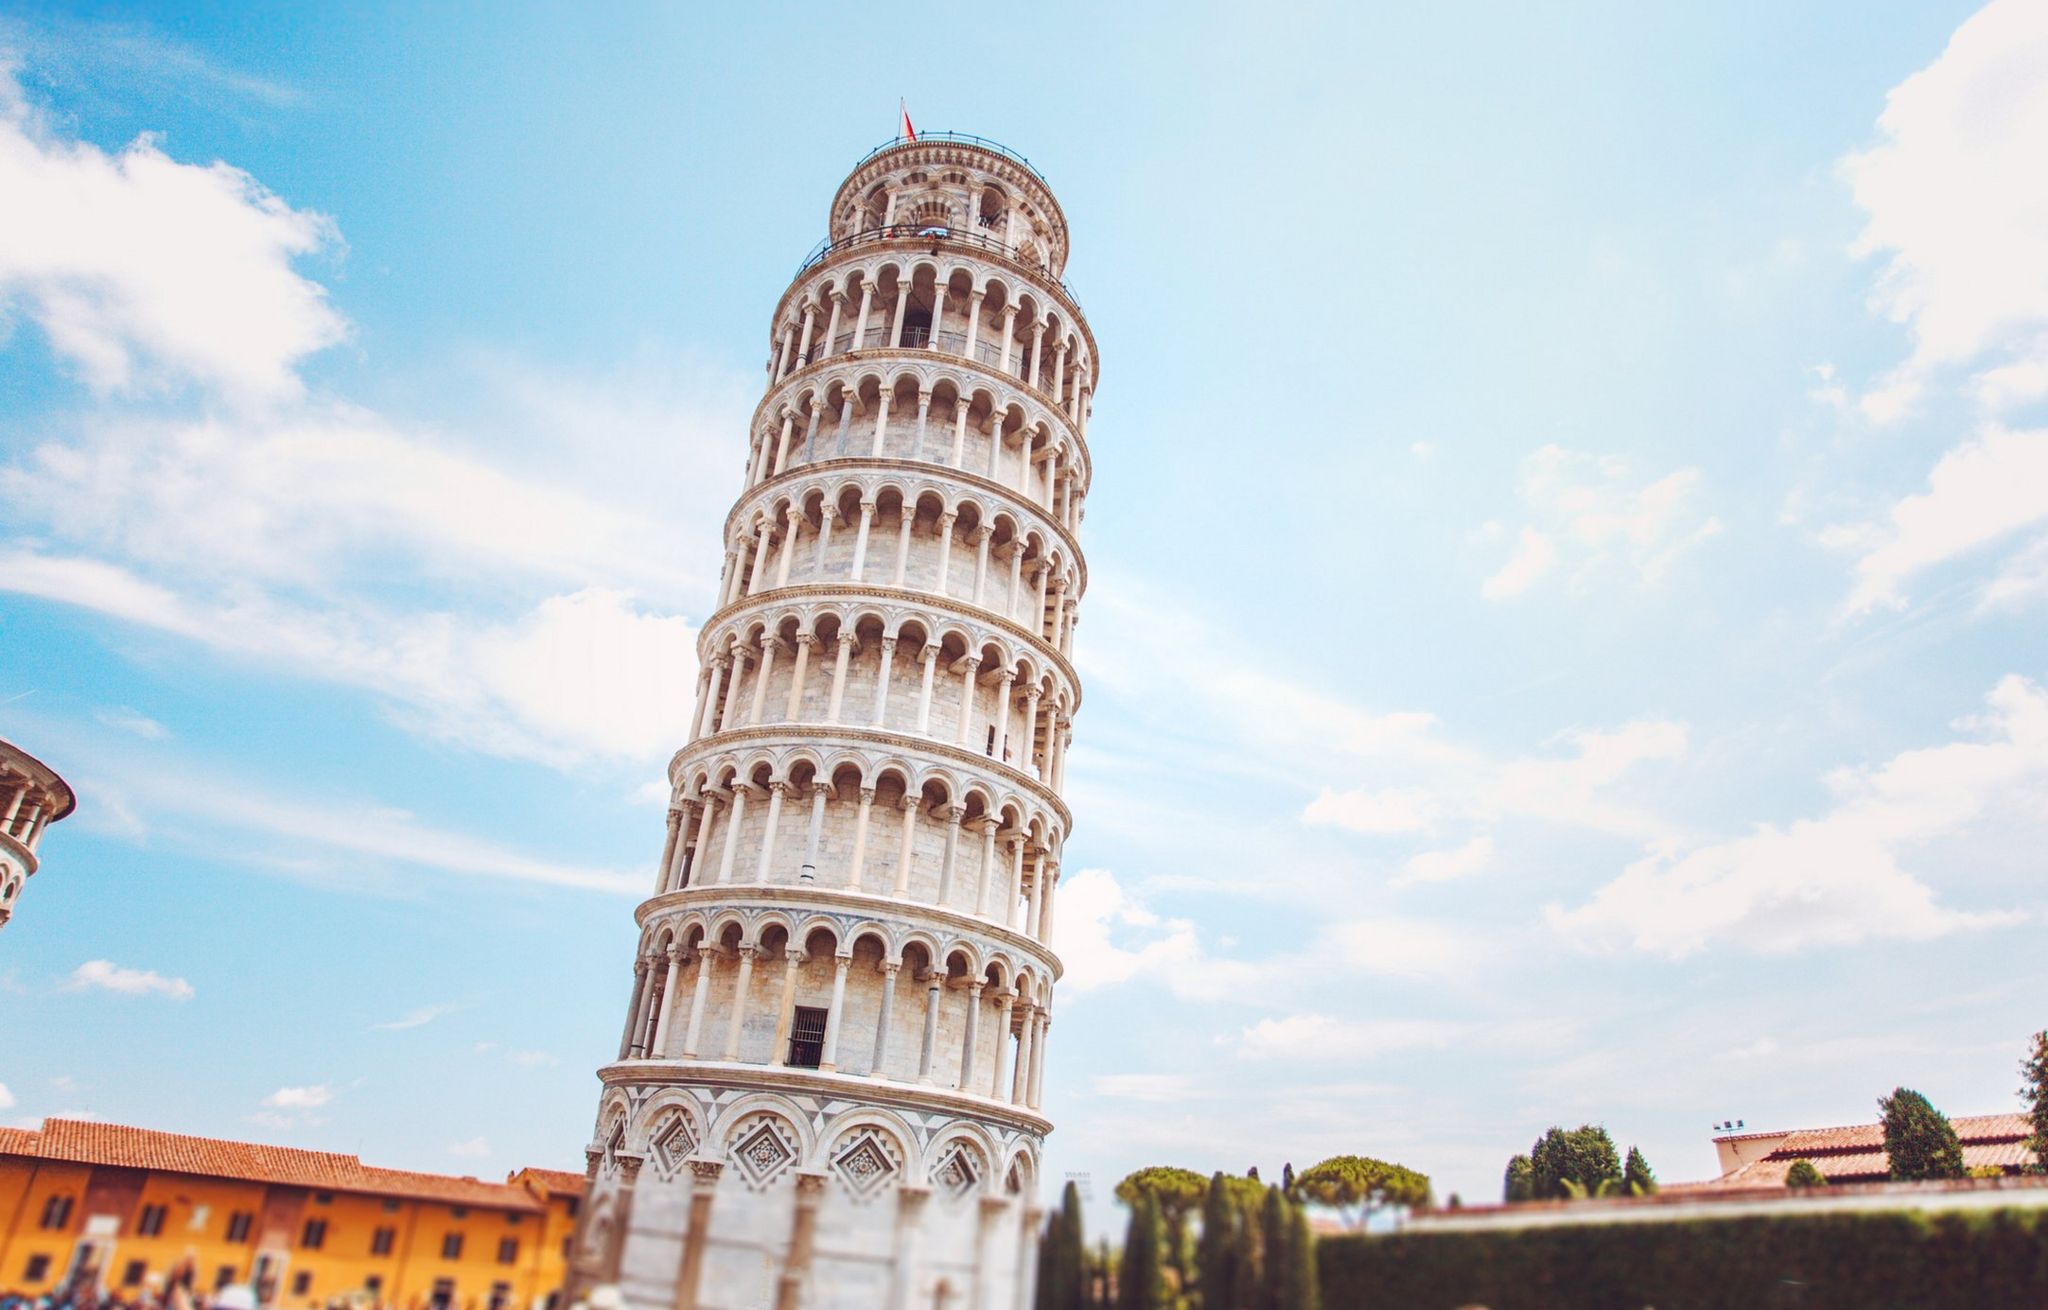 12-best-leaning-tower-of-pisa-facts-for-kids